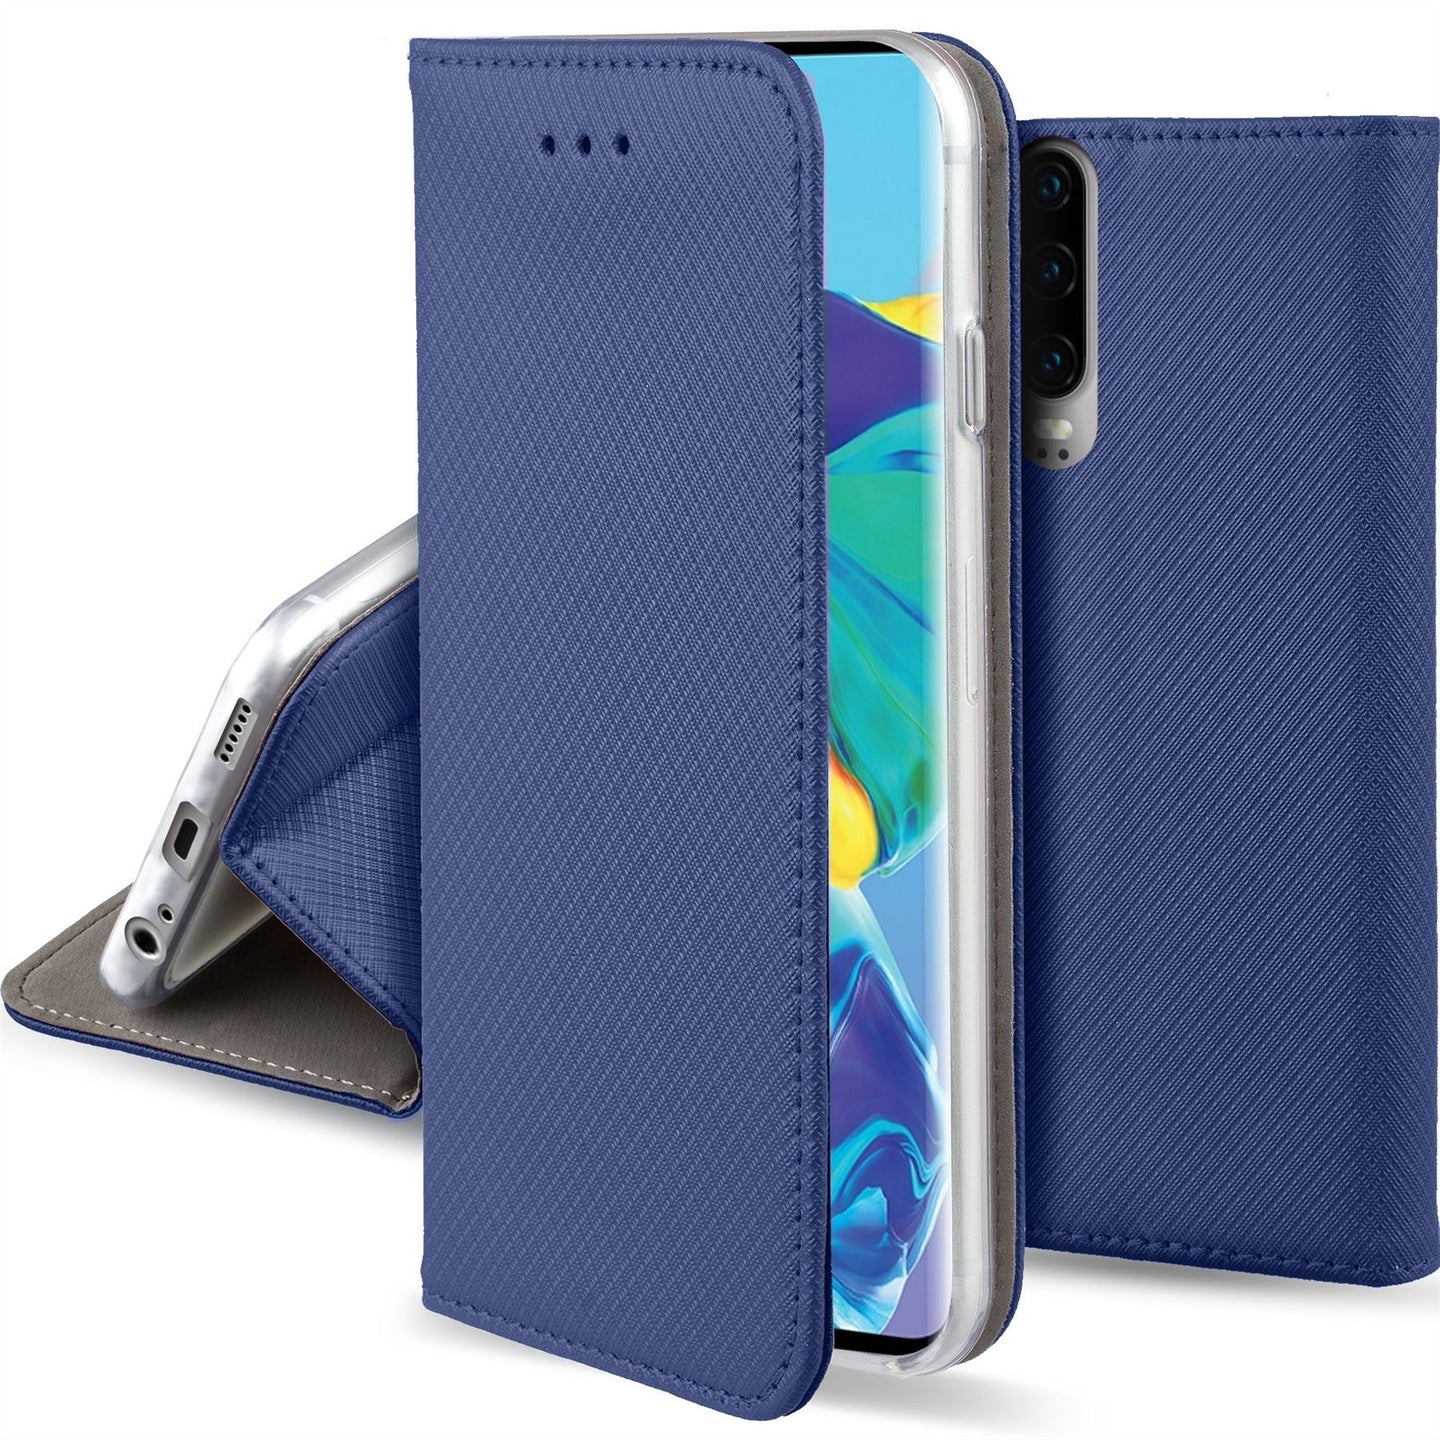 Moozy Case Flip Cover for Huawei P30, Dark Blue - Smart Magnetic Flip Case with Card Holder and Stand